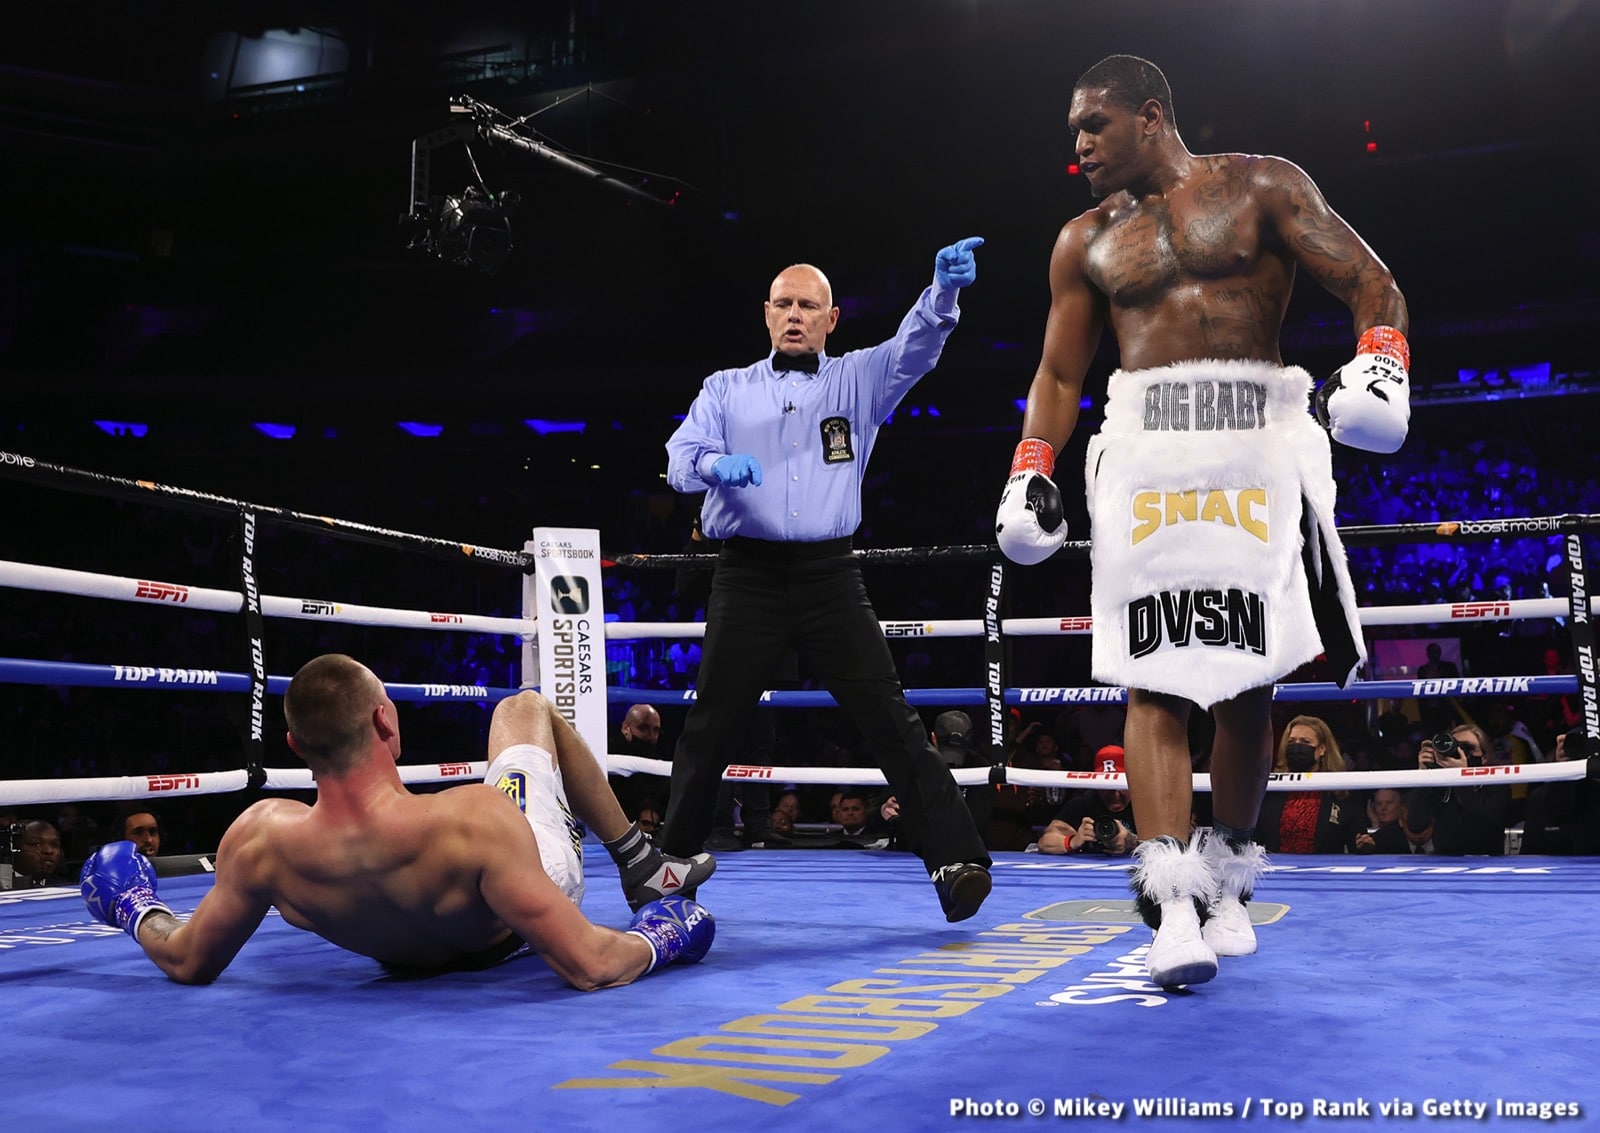 Deontay Wilder boxing photo